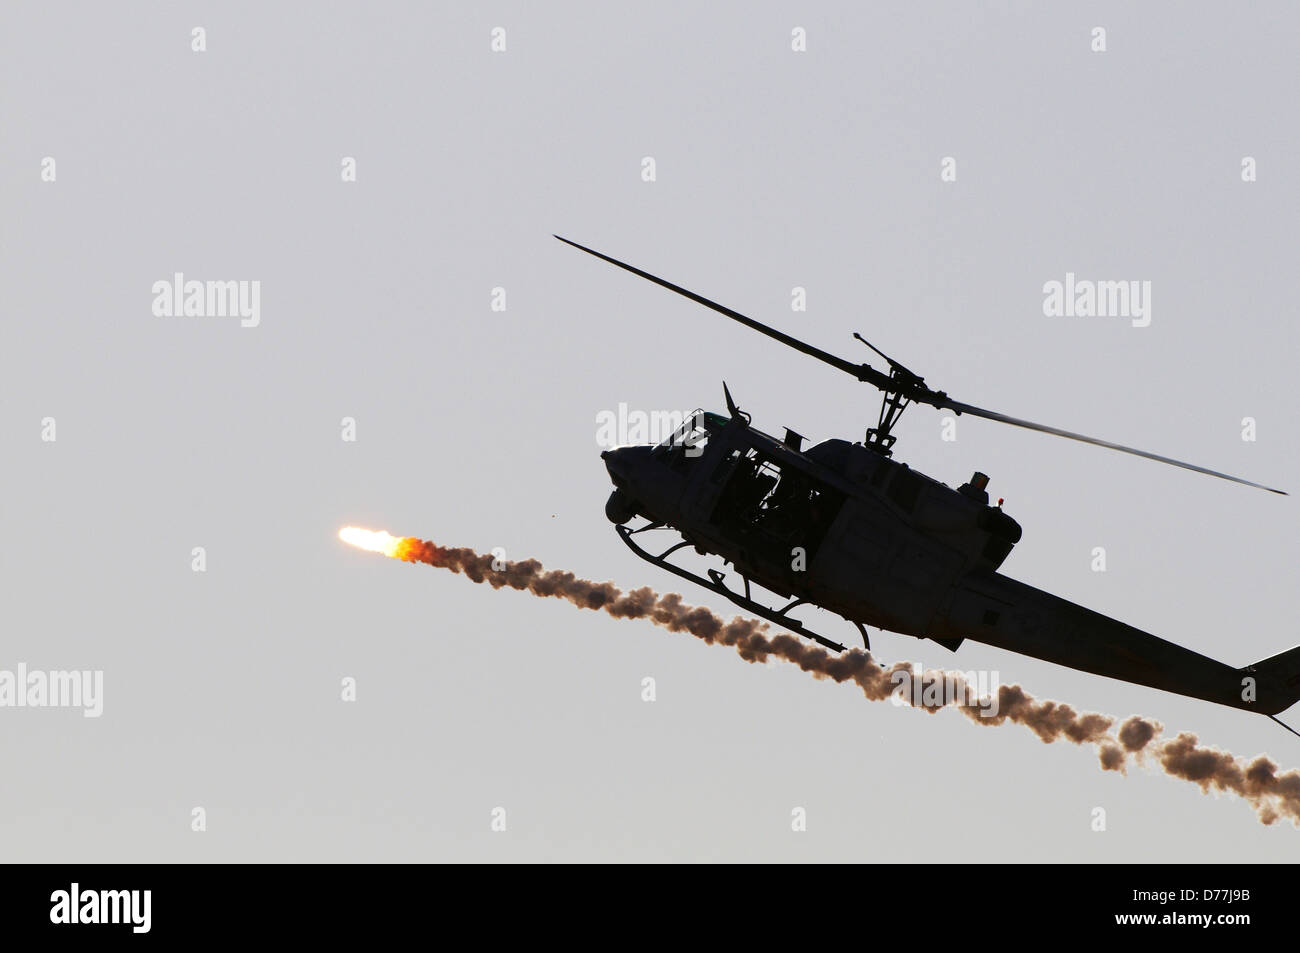 US Marine Corps UH-1N Iroquois Helicopter expends flare during military training exercise Chocolate Mountain Aerial Gunnery Stock Photo